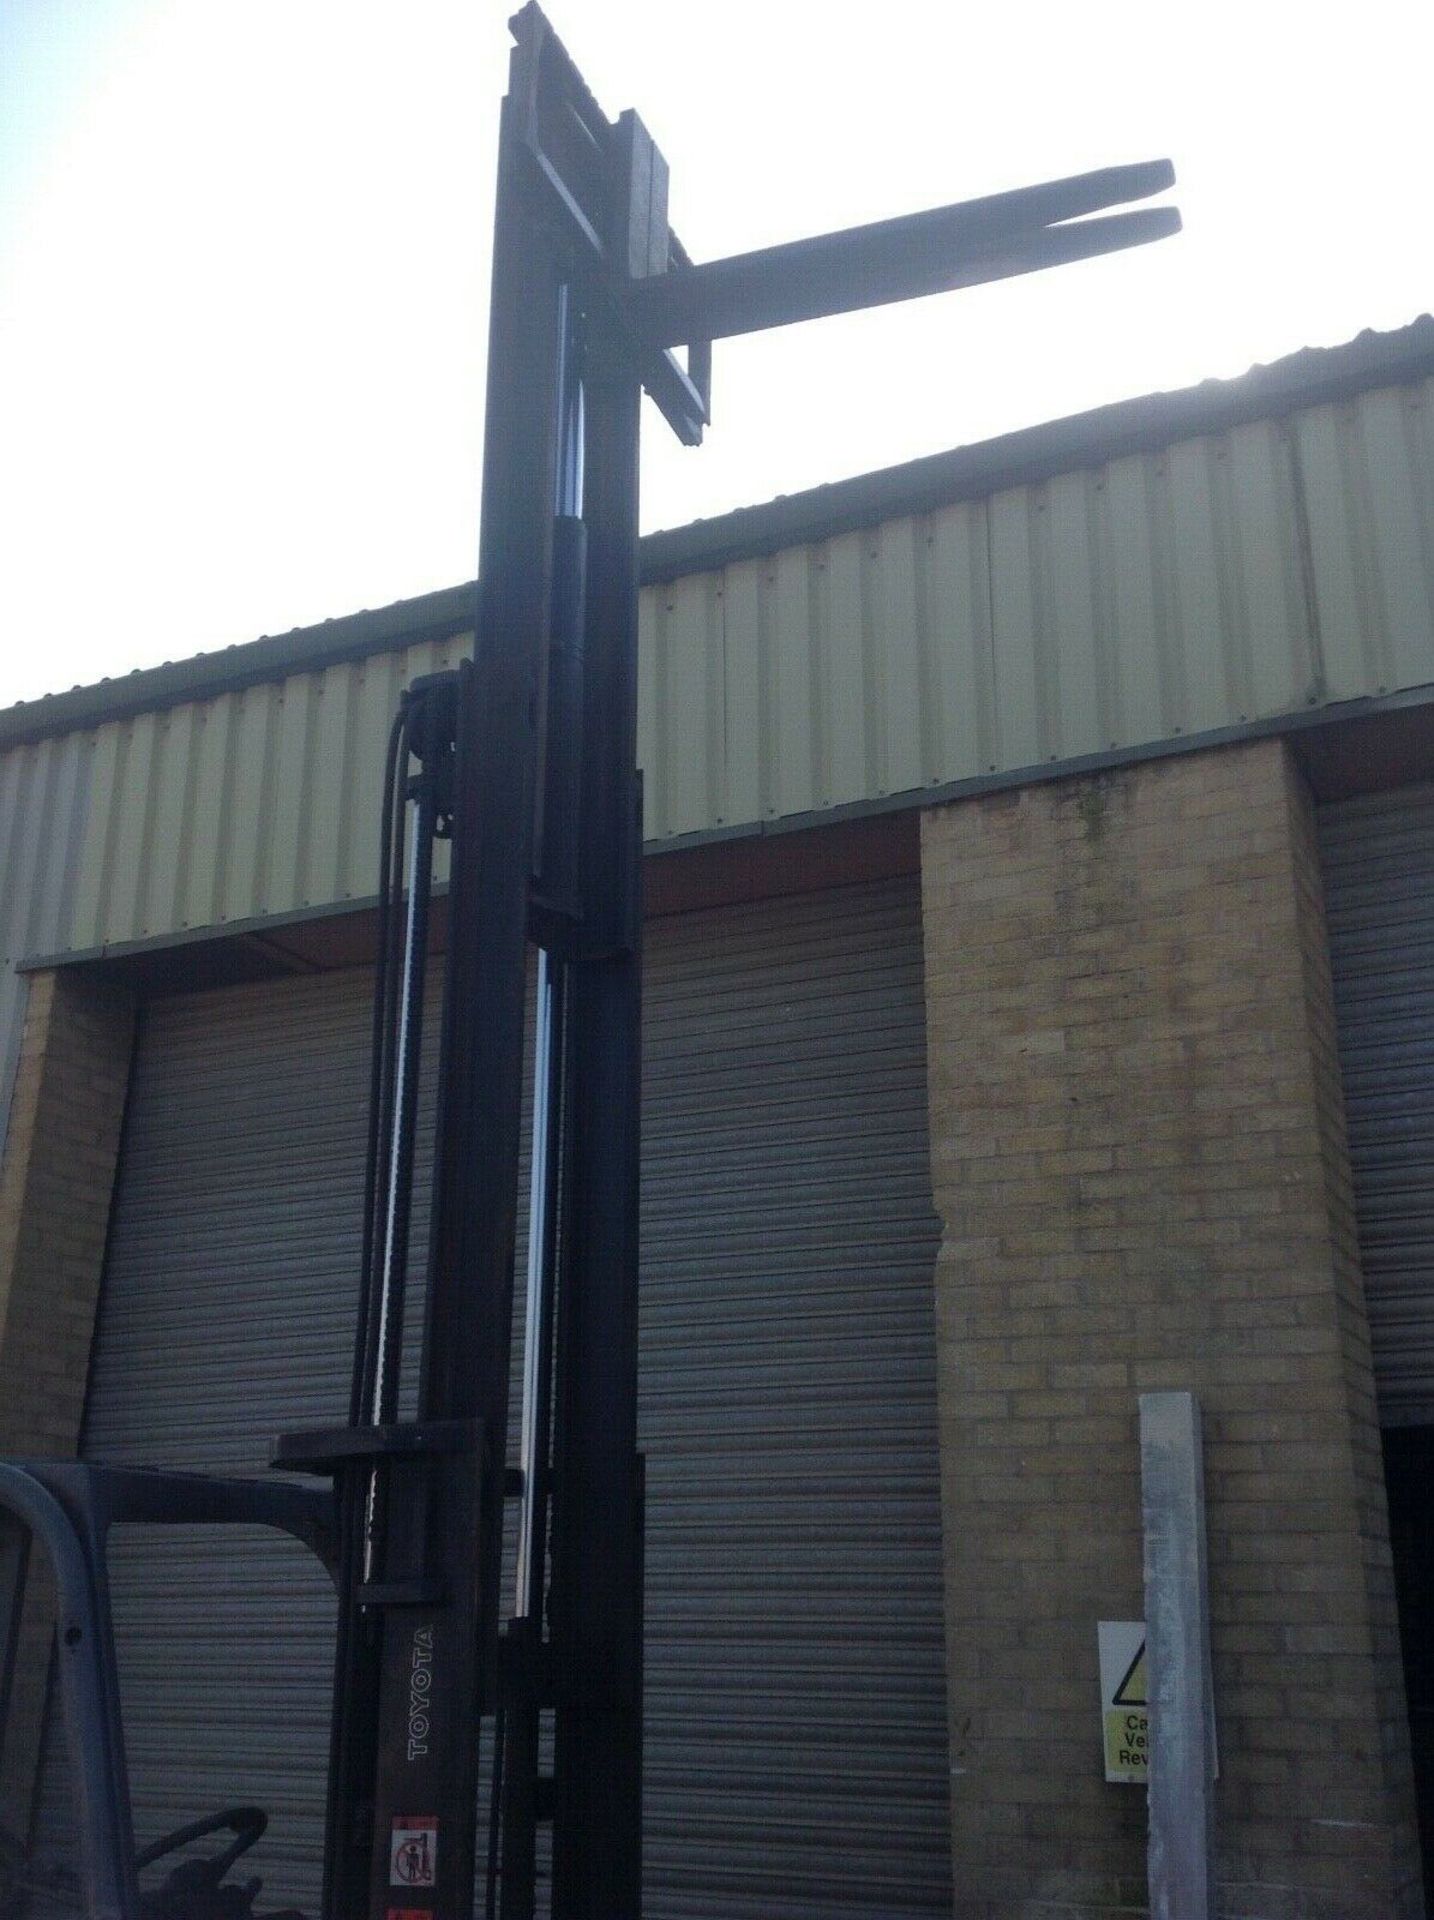 Toyota 2.5 ton gas forklift truck - Image 3 of 5